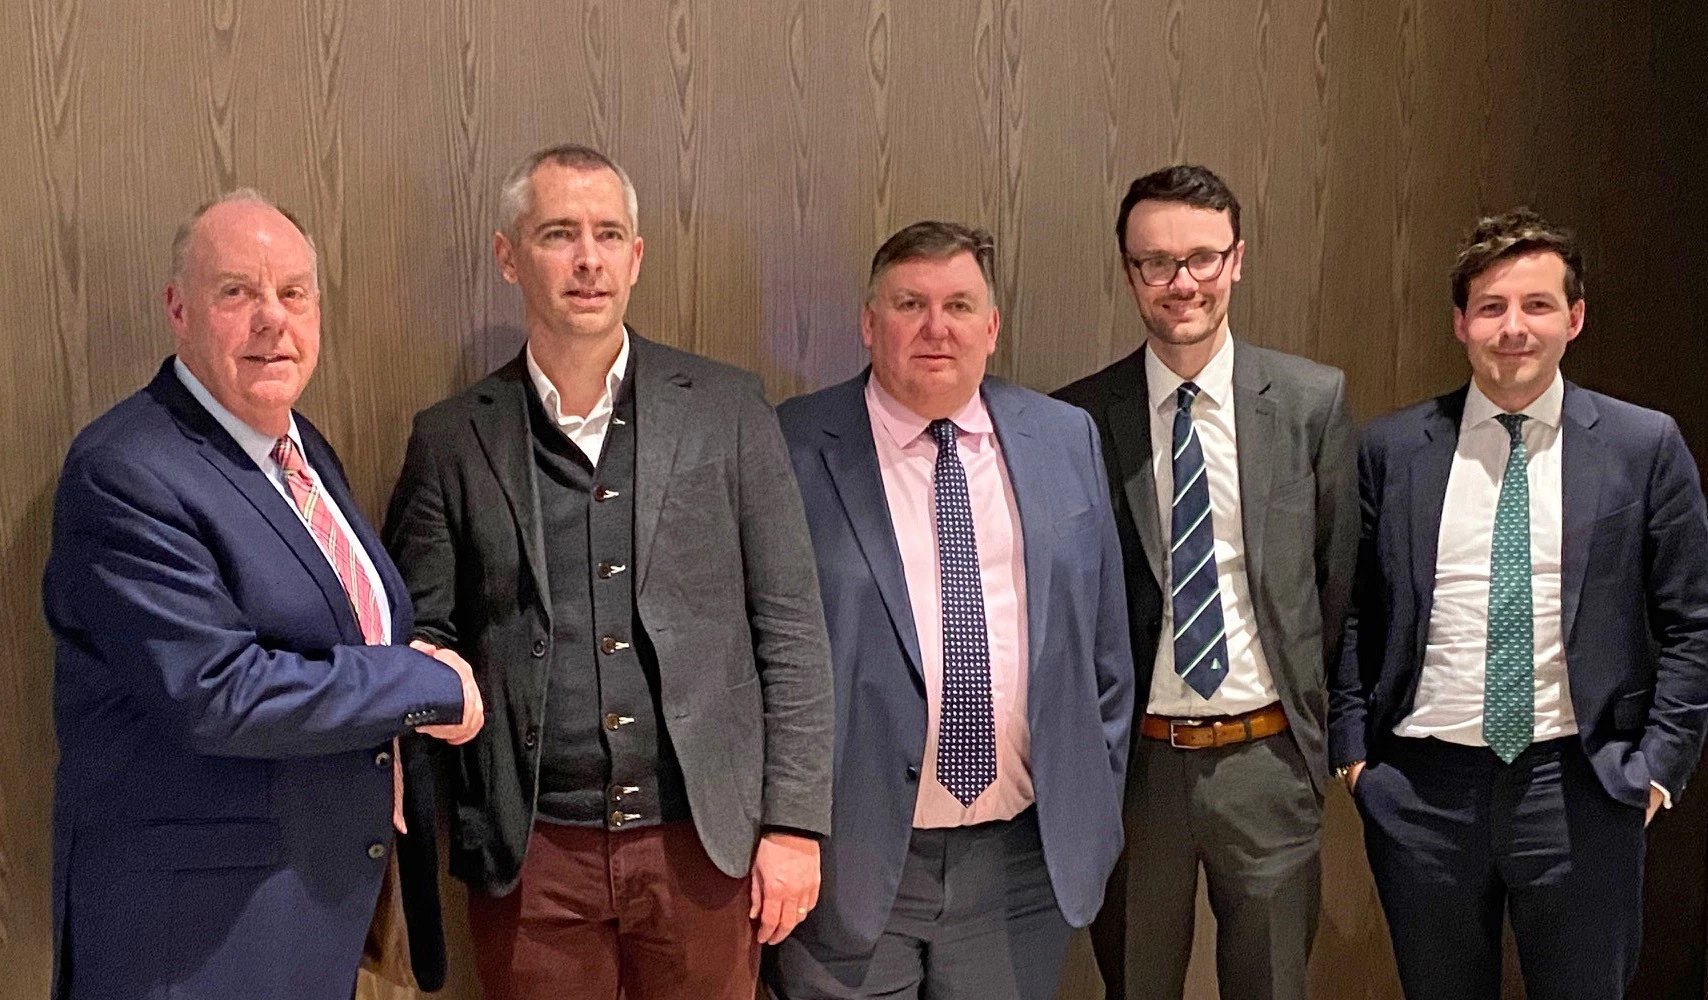 L to R - Martin Gale (Chairman, BSW), Tom Callaghan (Investment Manager, Endless), Tony Hackney (CEO, BSW), Alan Milne (CFO, BSW), Aidan Robson (Partner, Endless).